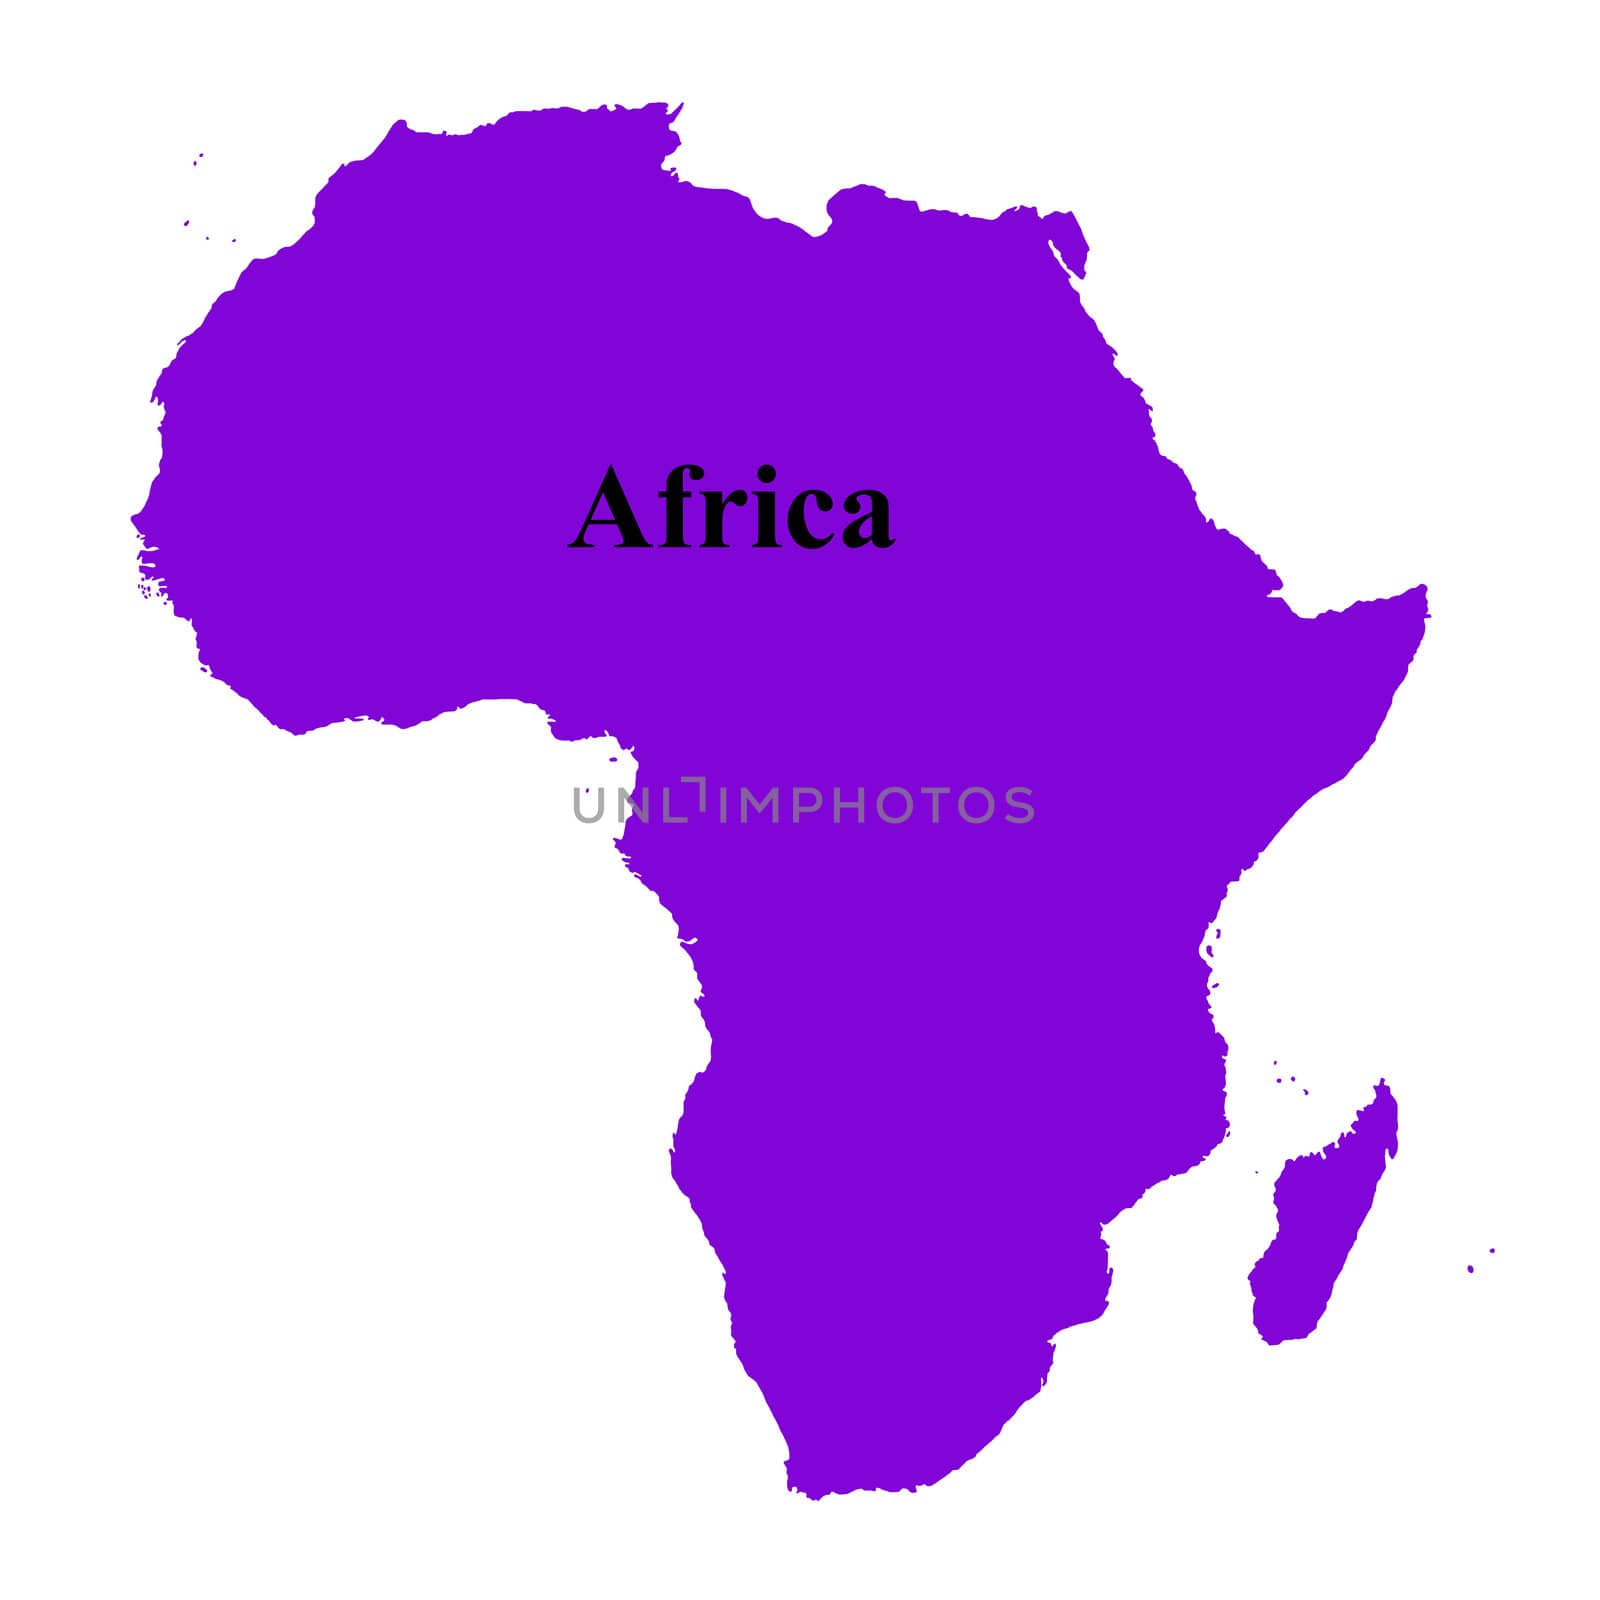 Africa by rook